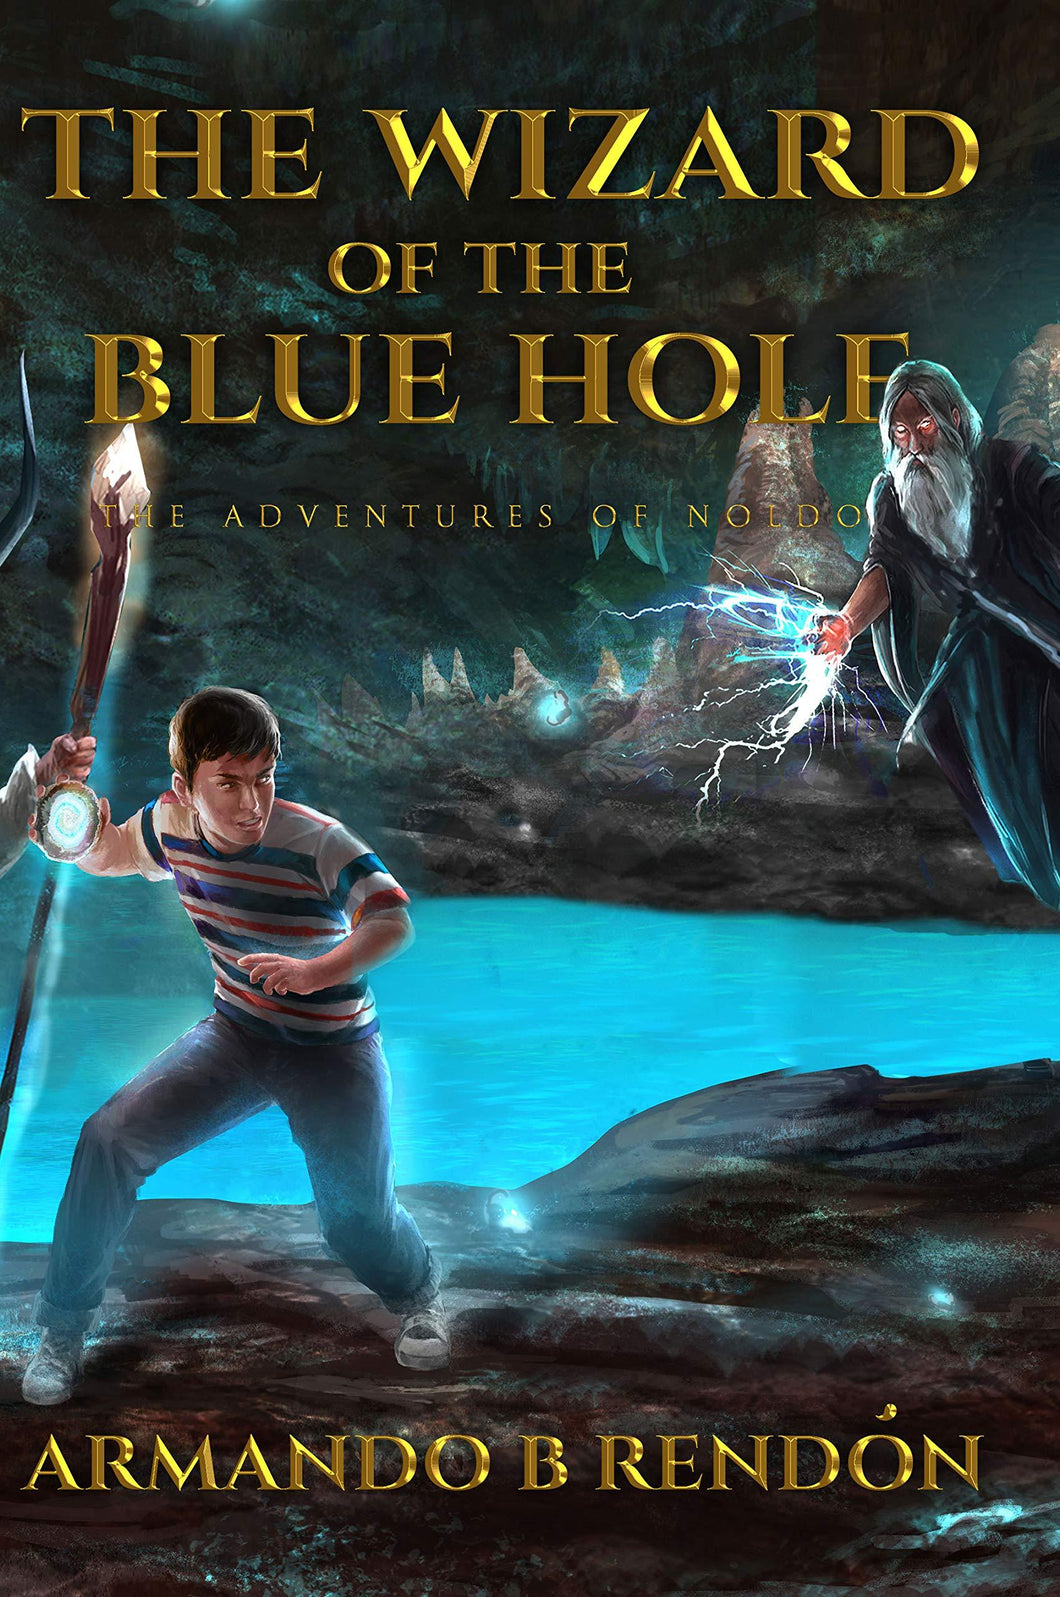 The Wizard of the Blue Hole: The Adventures of Noldo - Starry Night Publishing